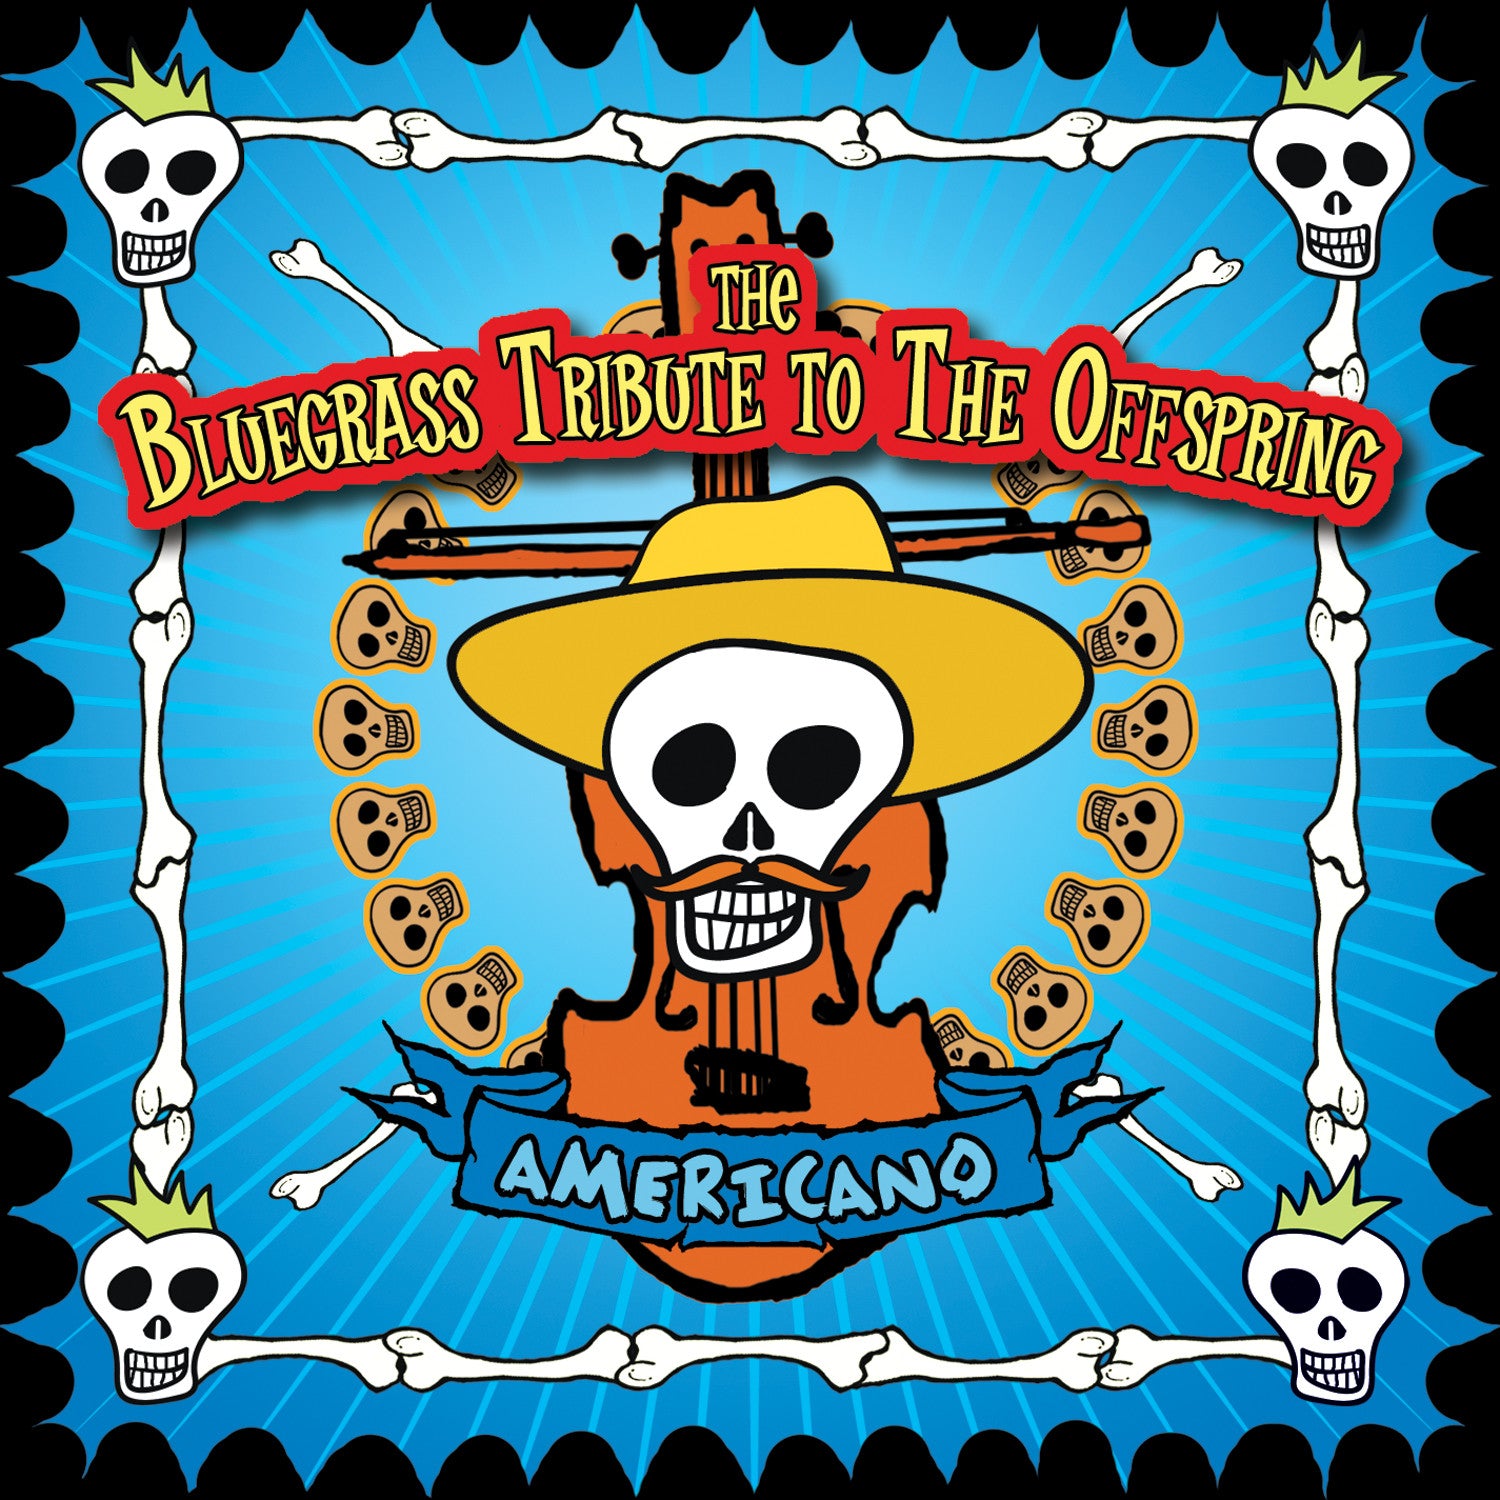 album art for the bluegrass tribute to the offspring - bluegrass covers of rock songs